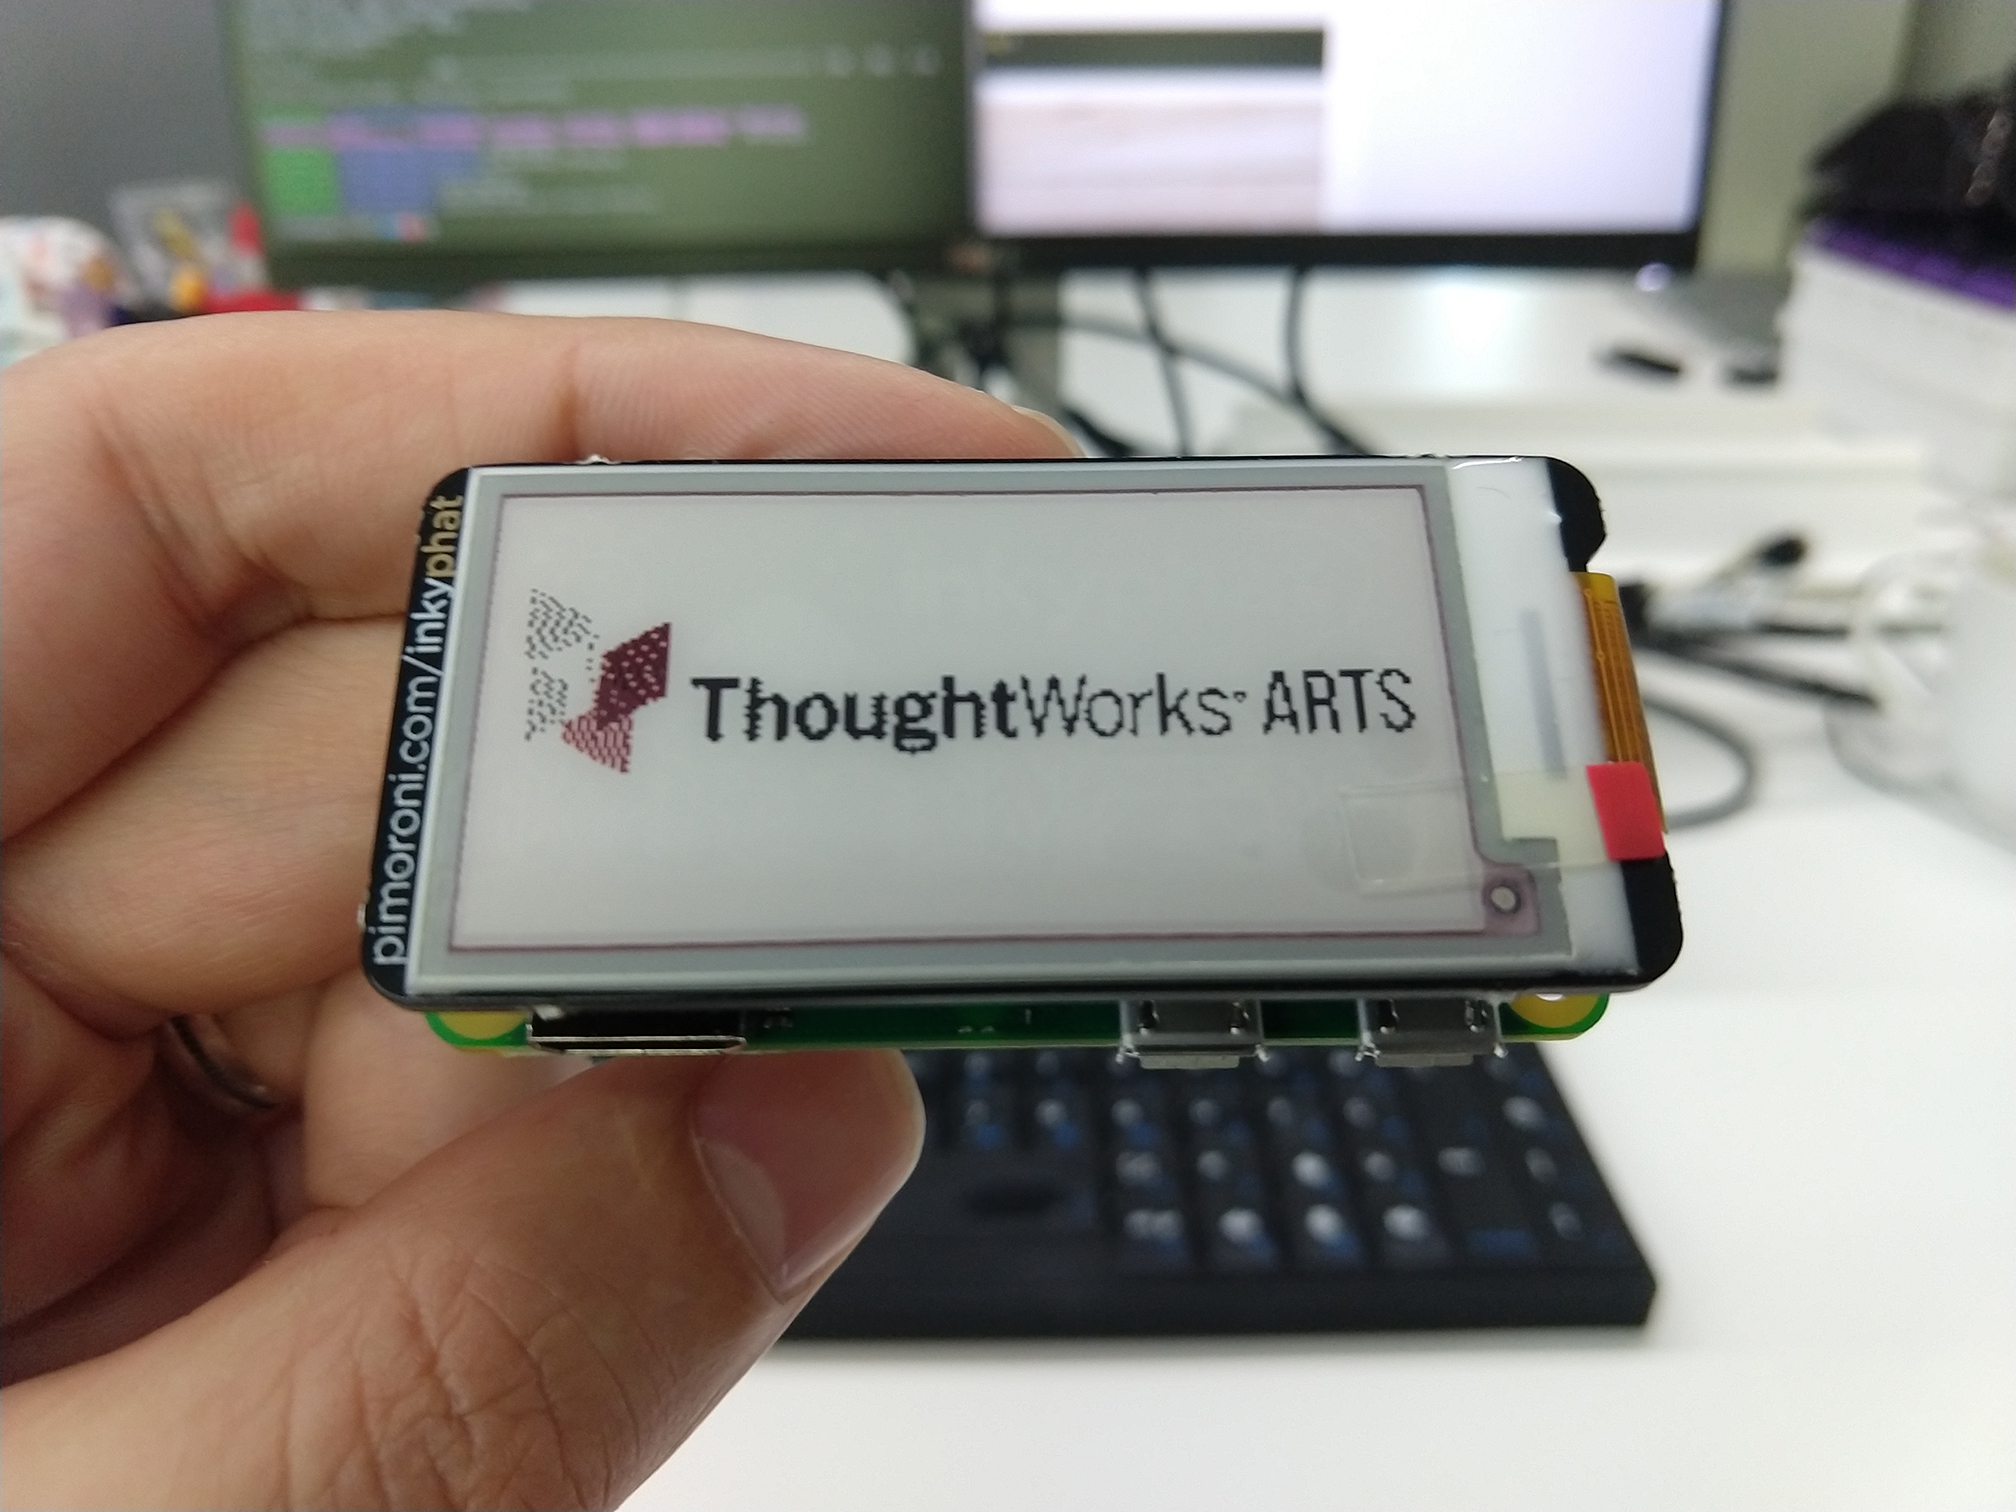 A hand holding an Inky PHAT with the ThoughtWorks Arts logo being displayed